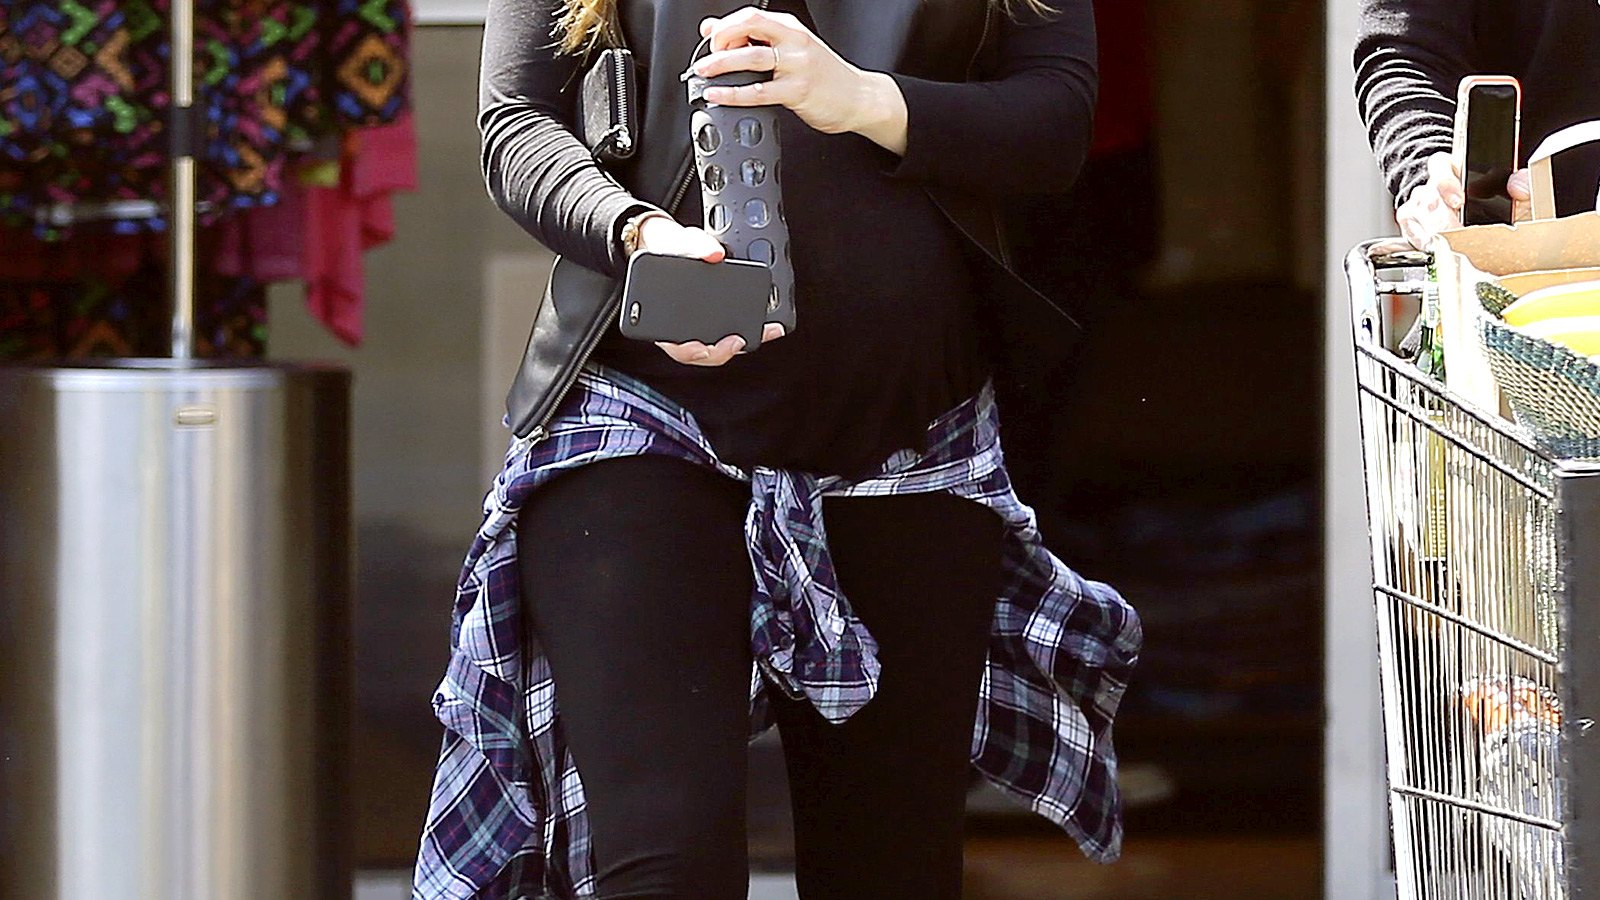 Pregnant Jessica Biel goes shopping at Whole Foods on March 21, 2015.